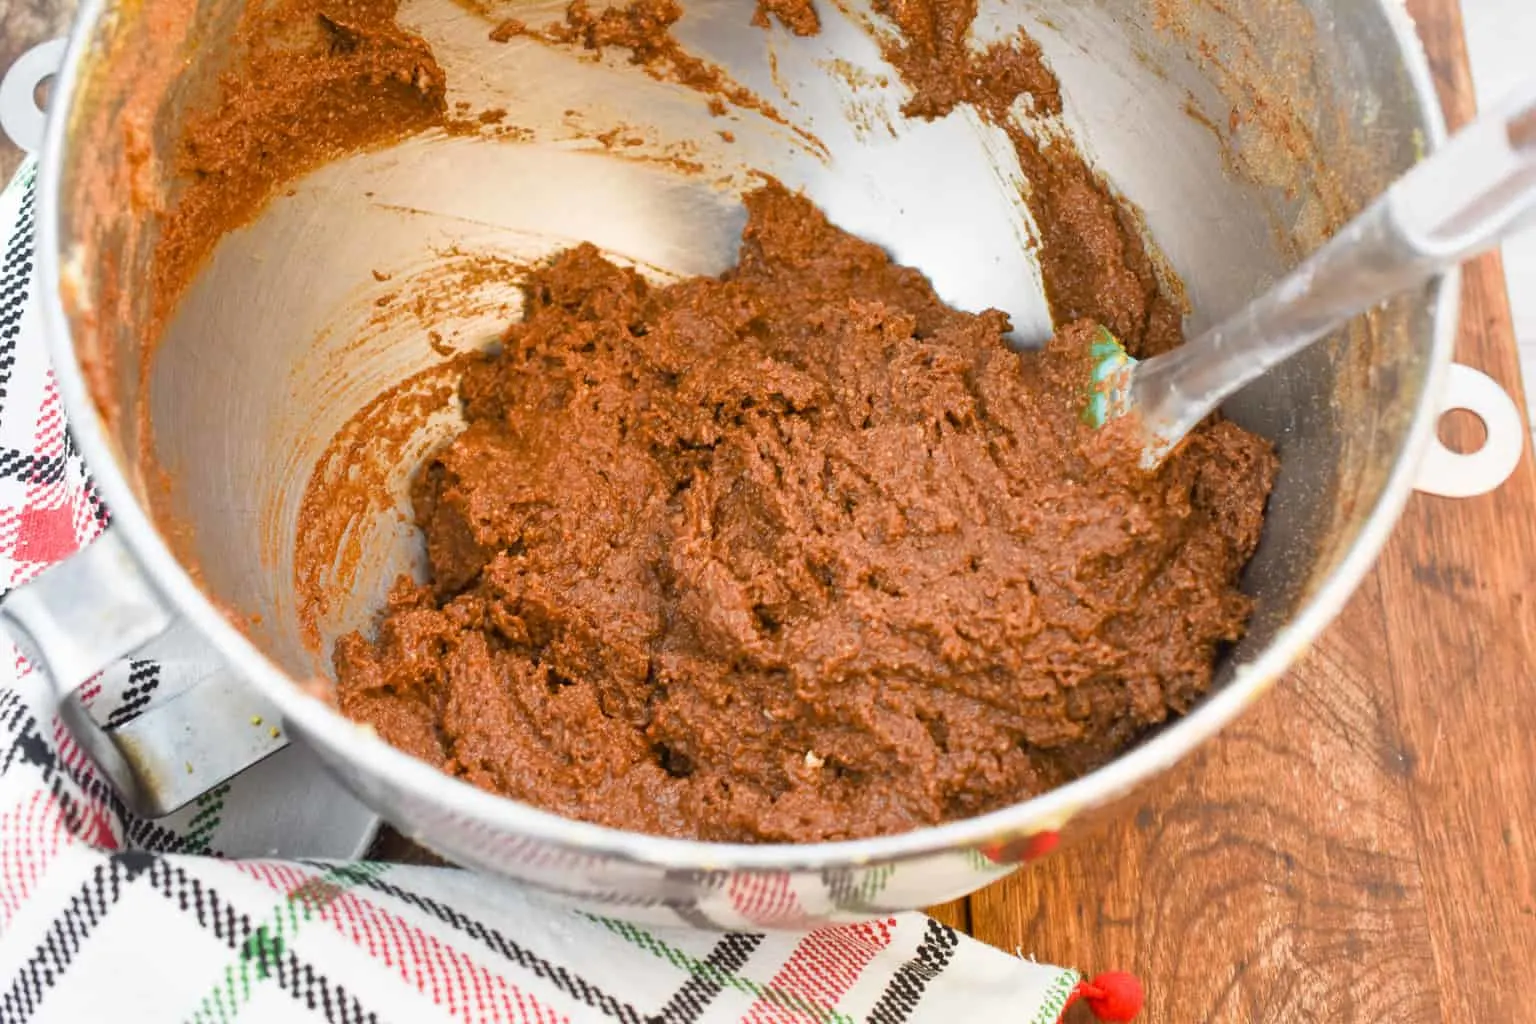 Keto gingerbread loaf batter being mixed in a metal bowl